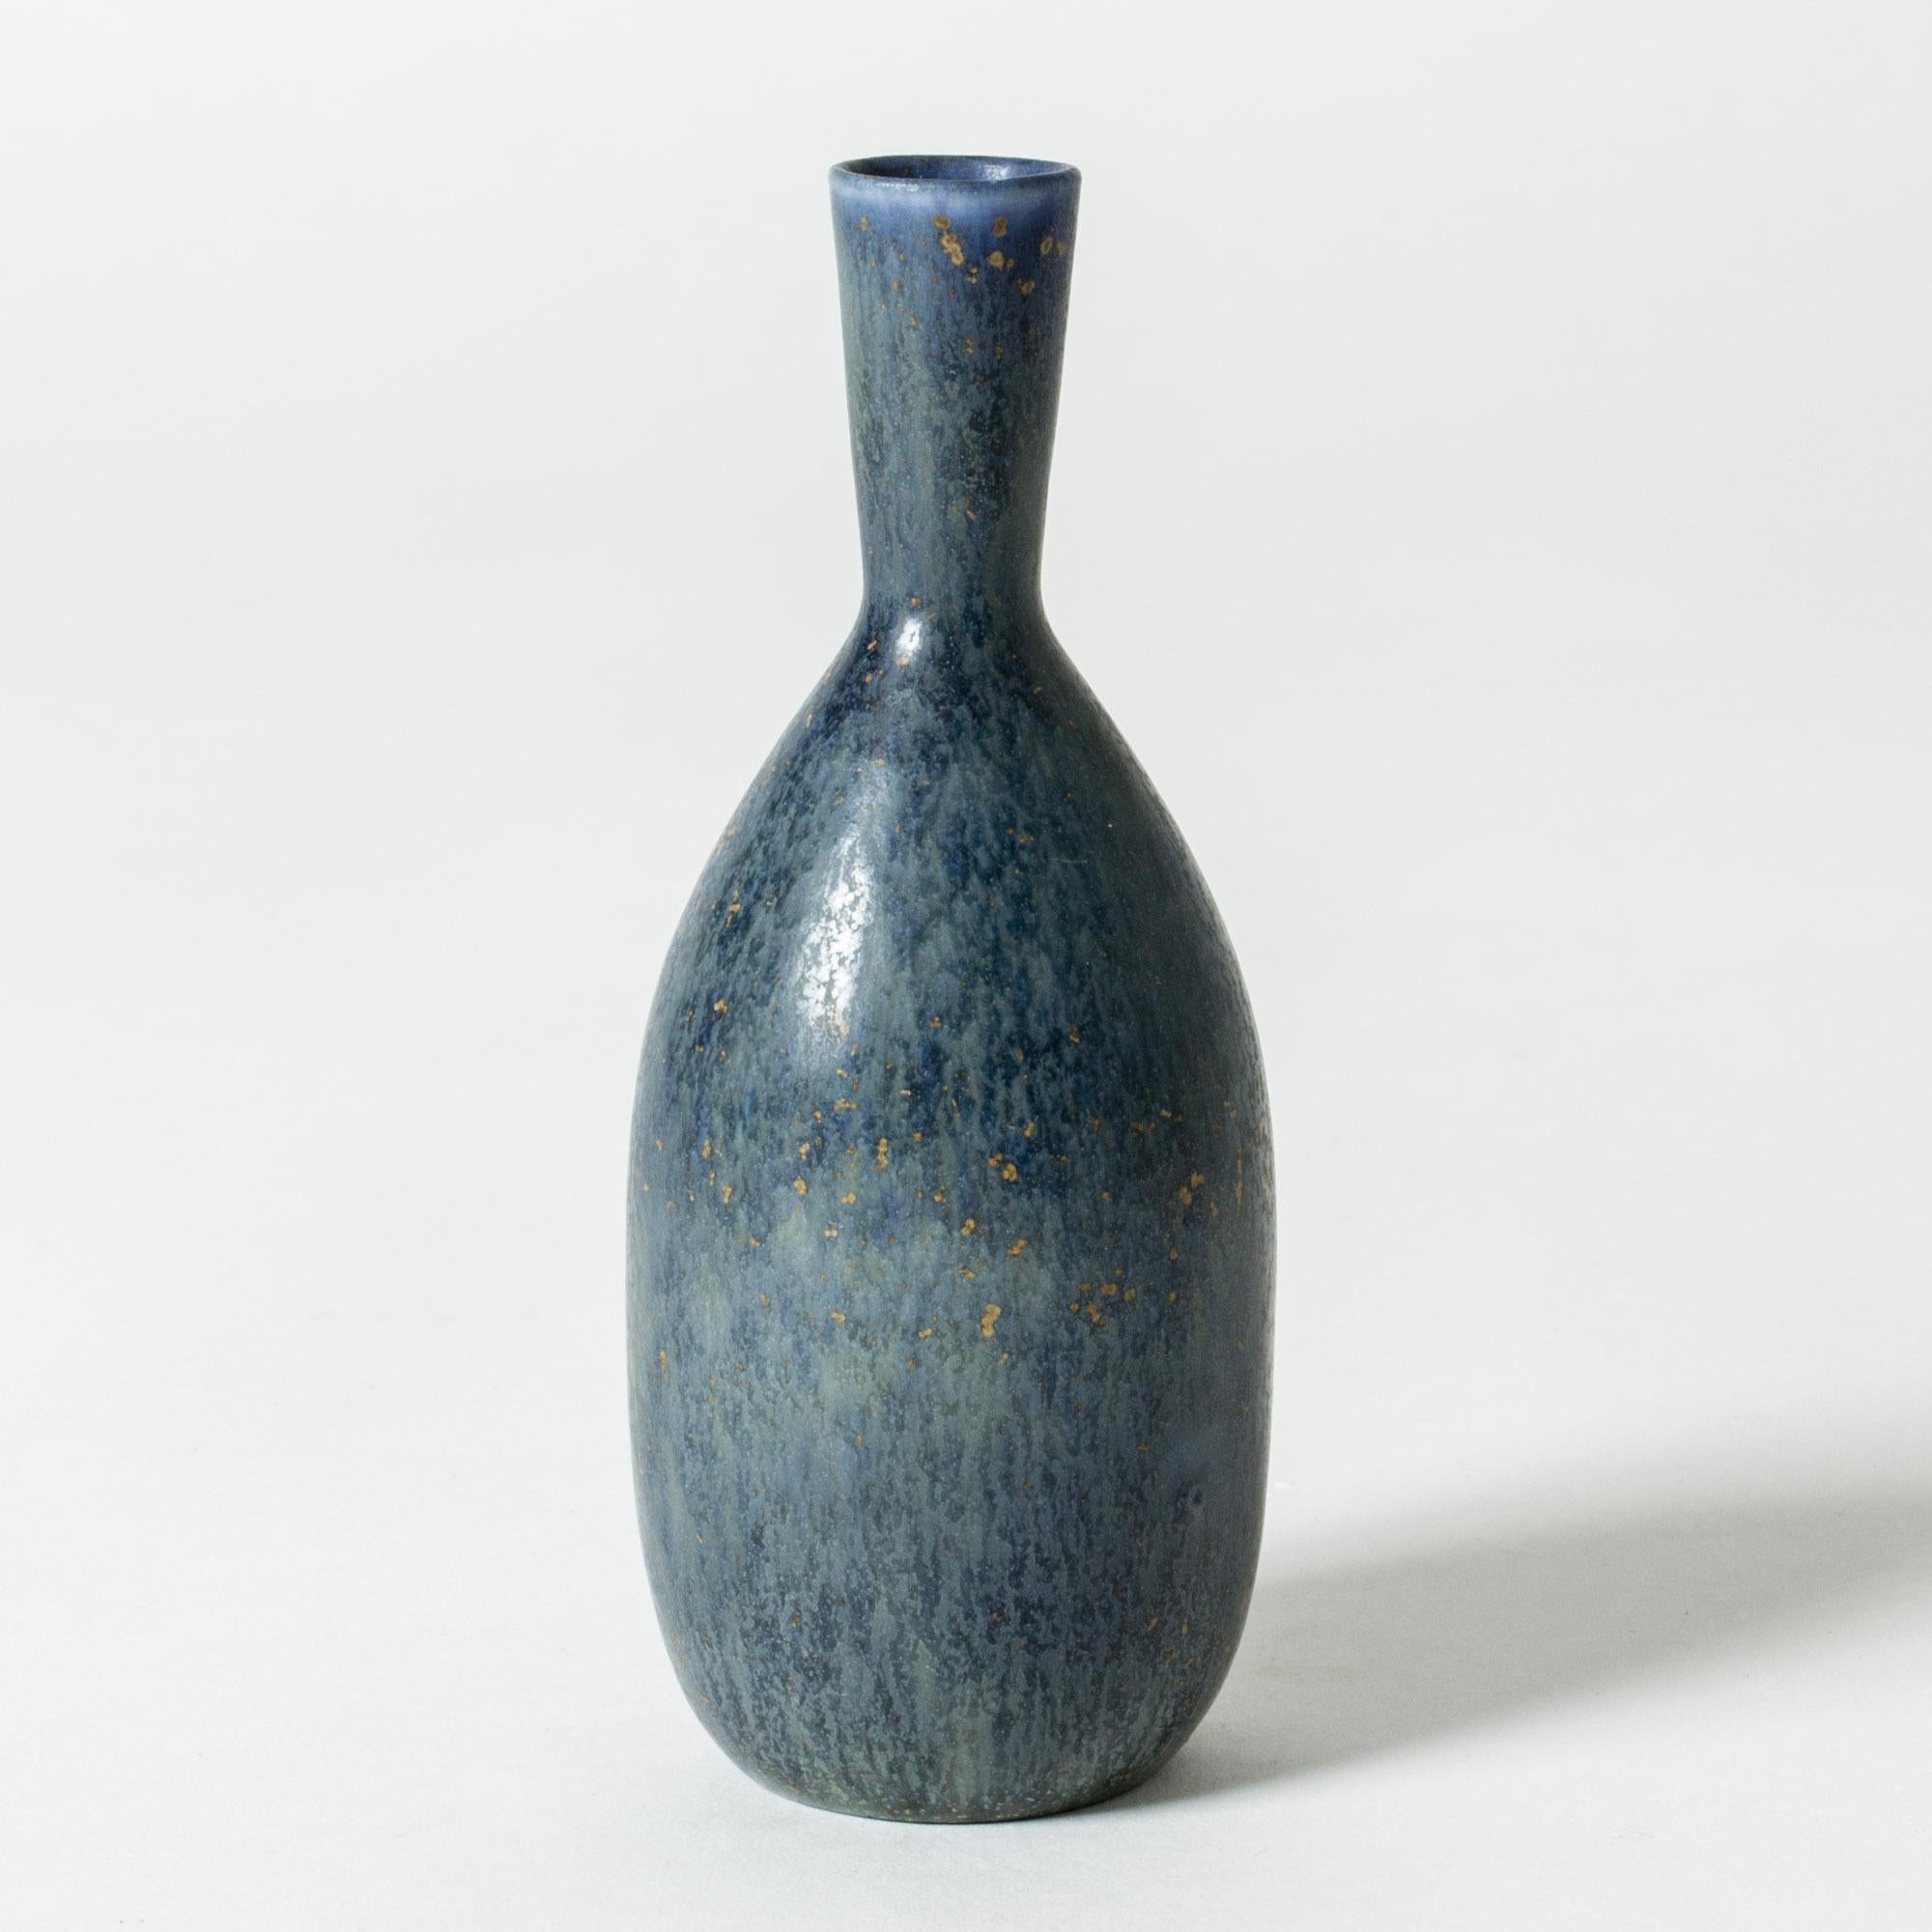 Beautiful stoneware vase by Carl-Harry Stålhane in a neat Size and sleek form. Steely blue glaze with color speckles that have a golden effect.